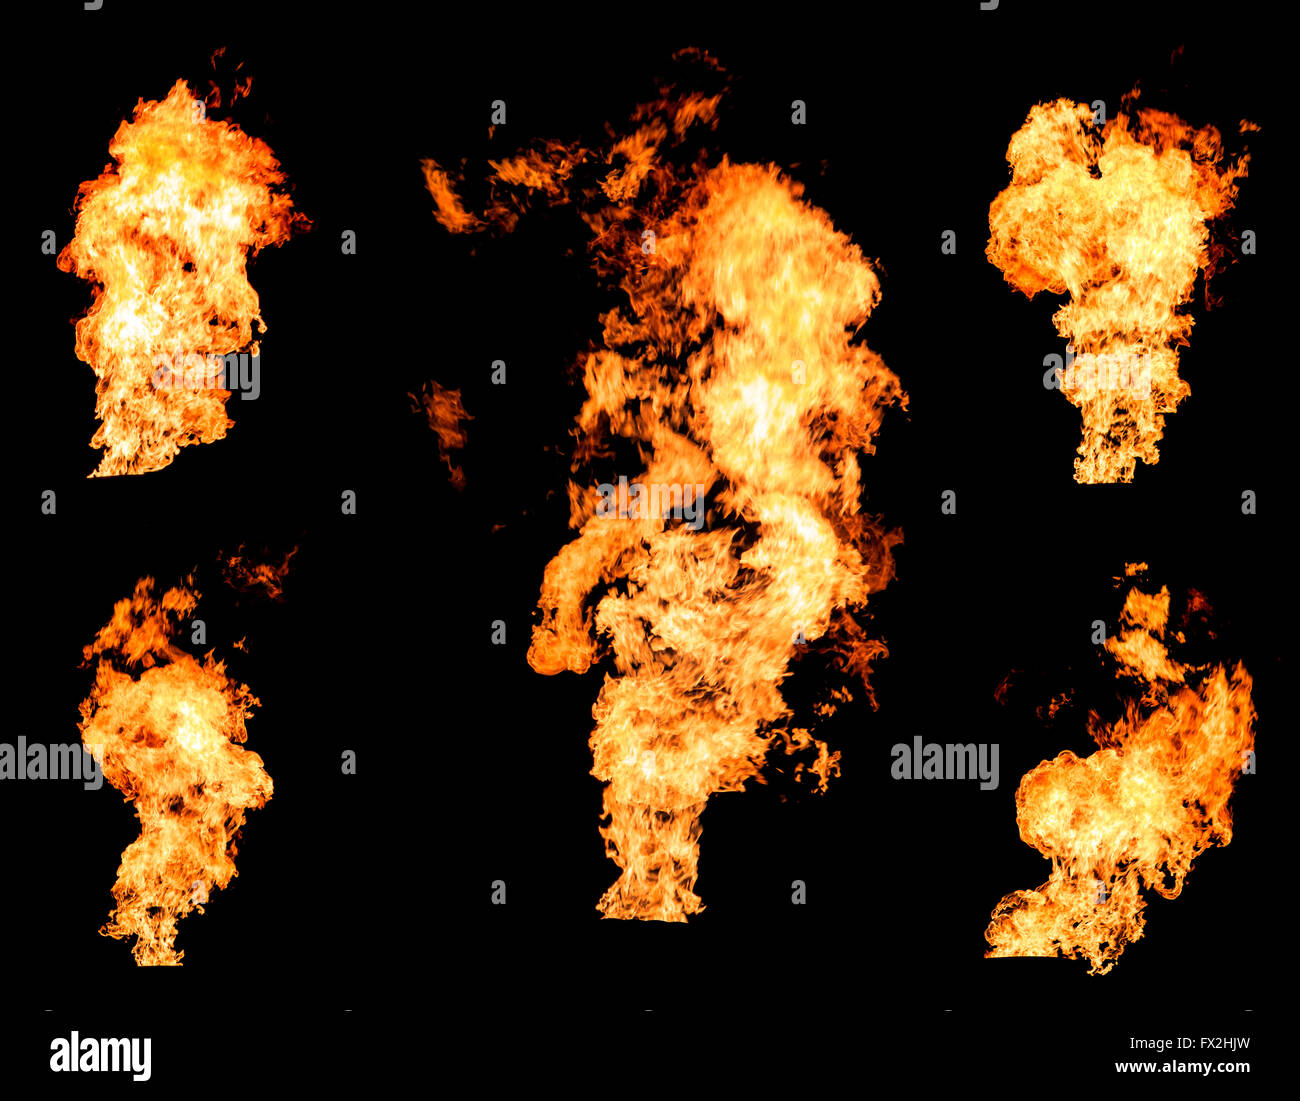 Blazing fire raging flame of burning gas or oil photo set isolated on black background Stock Photo